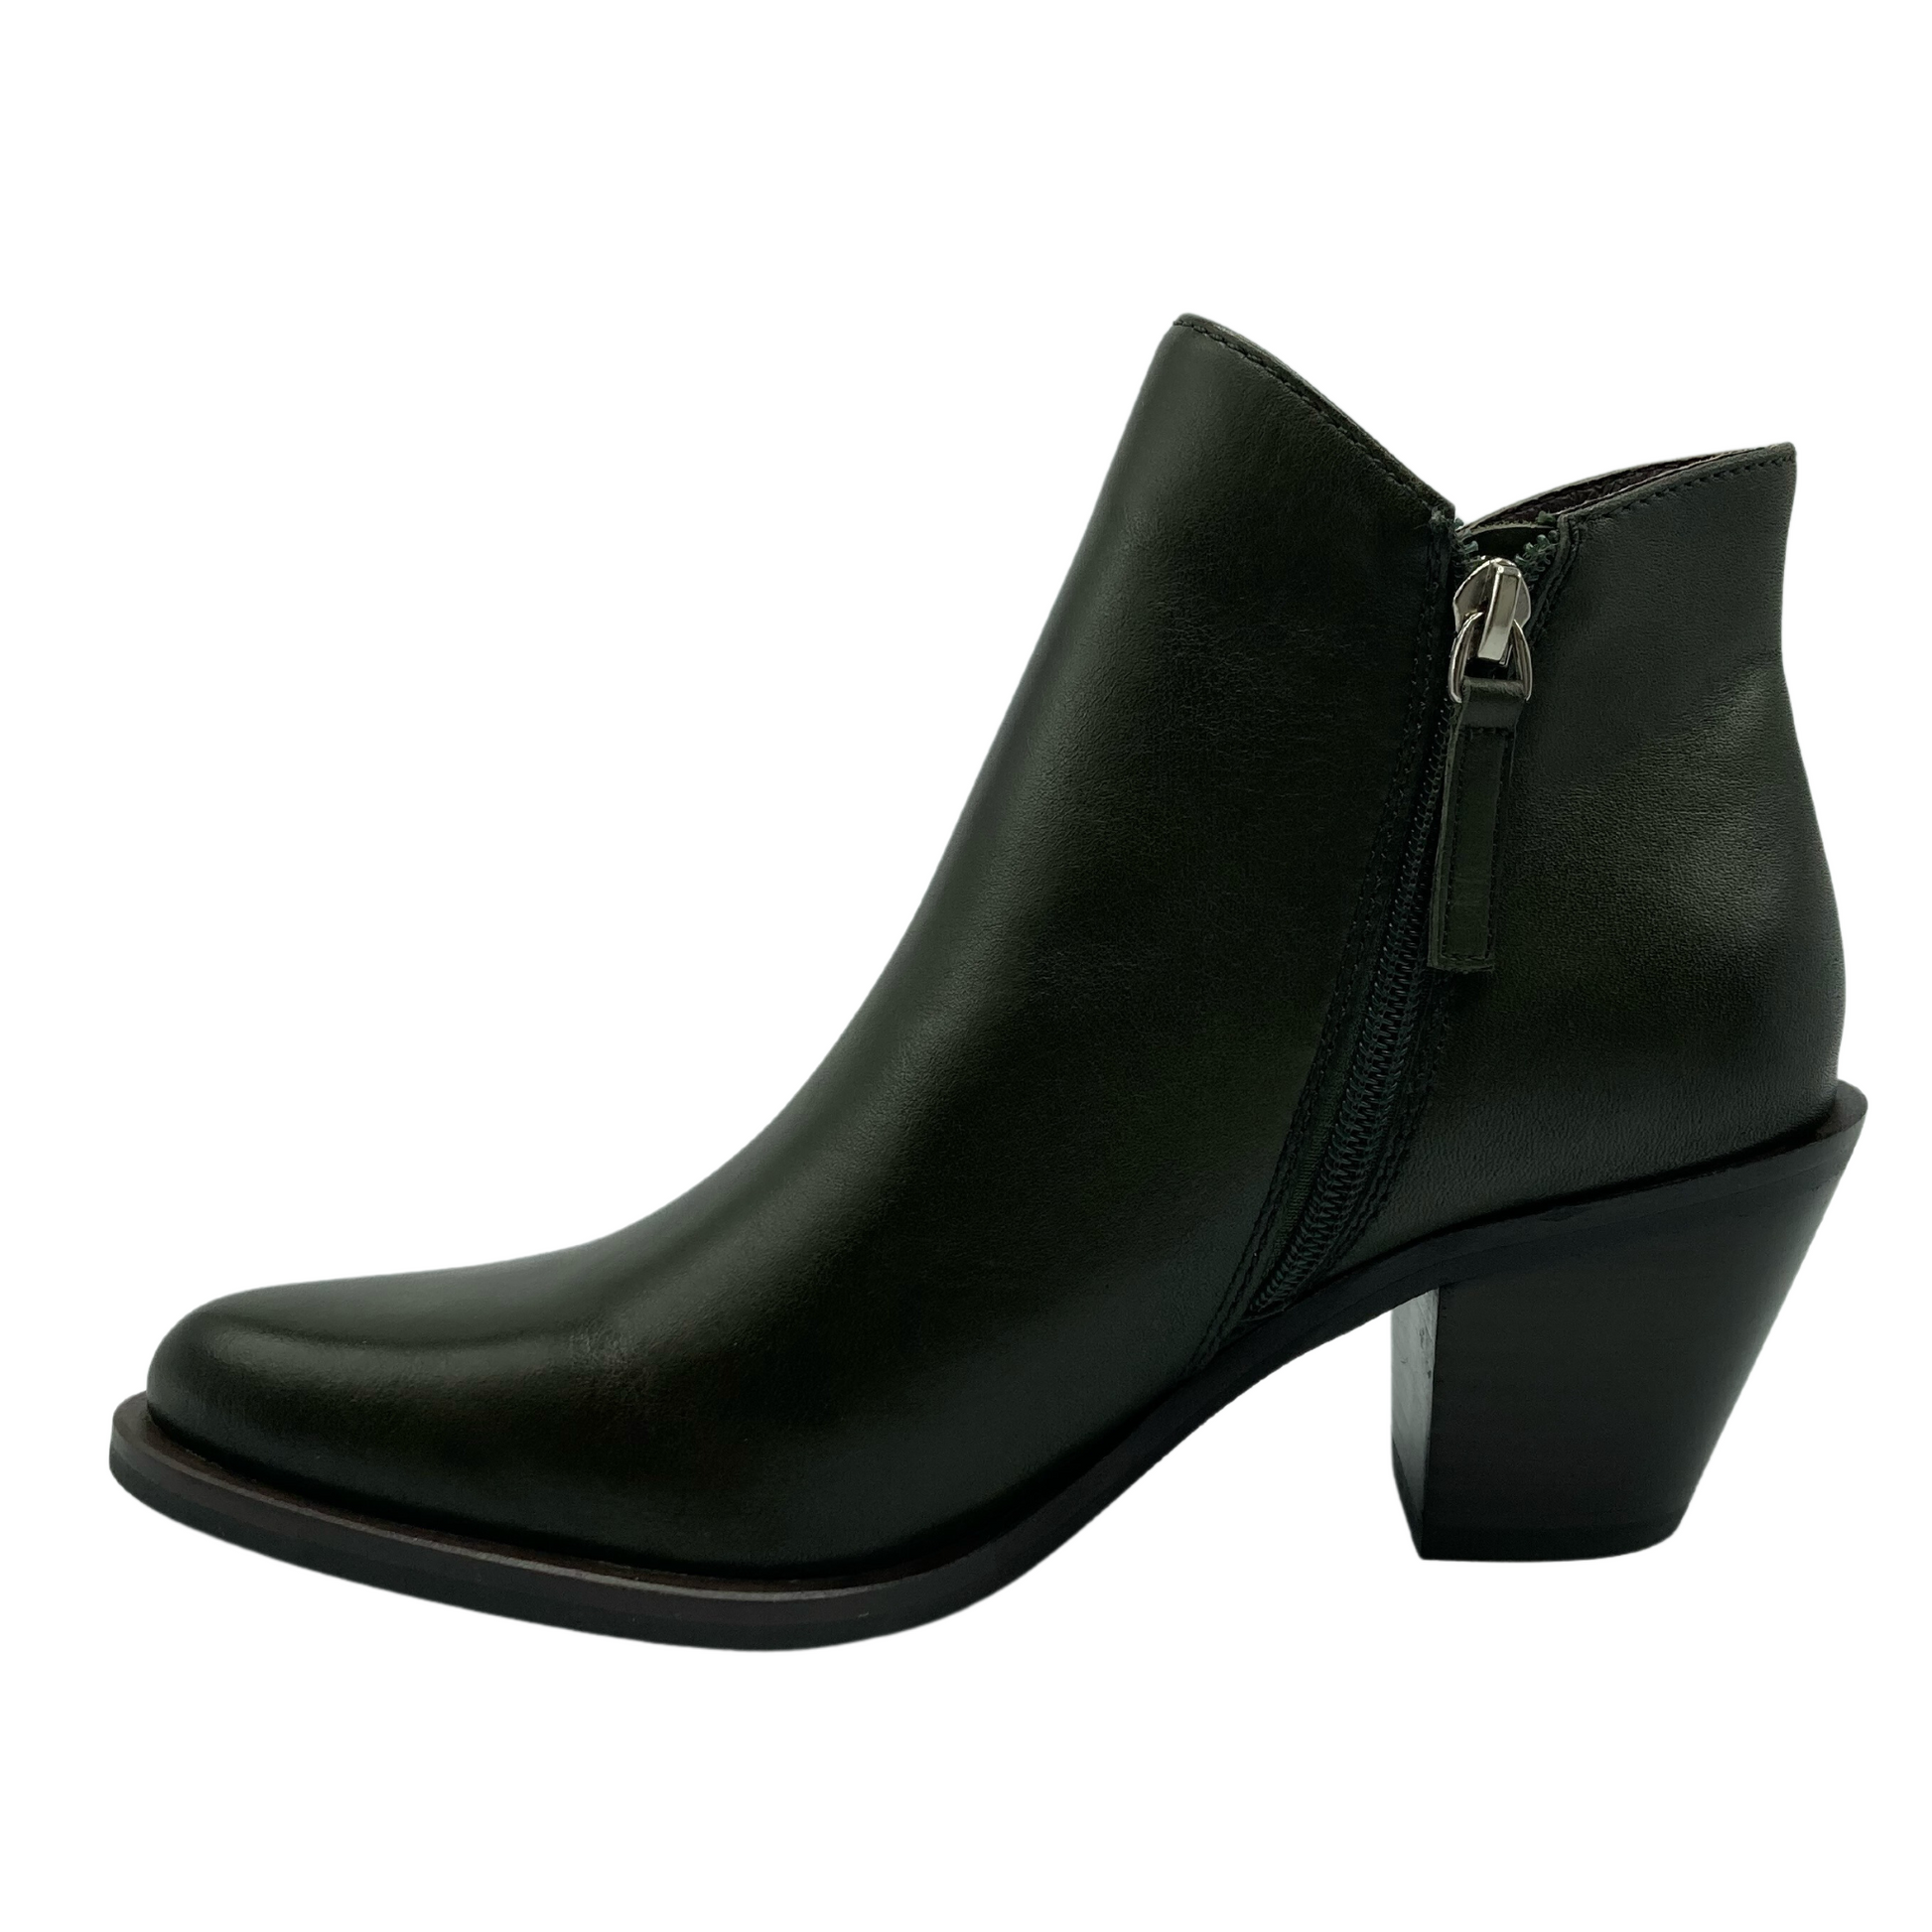 Right facing view of short leather boot with zipper, pointed toe and chunky heel